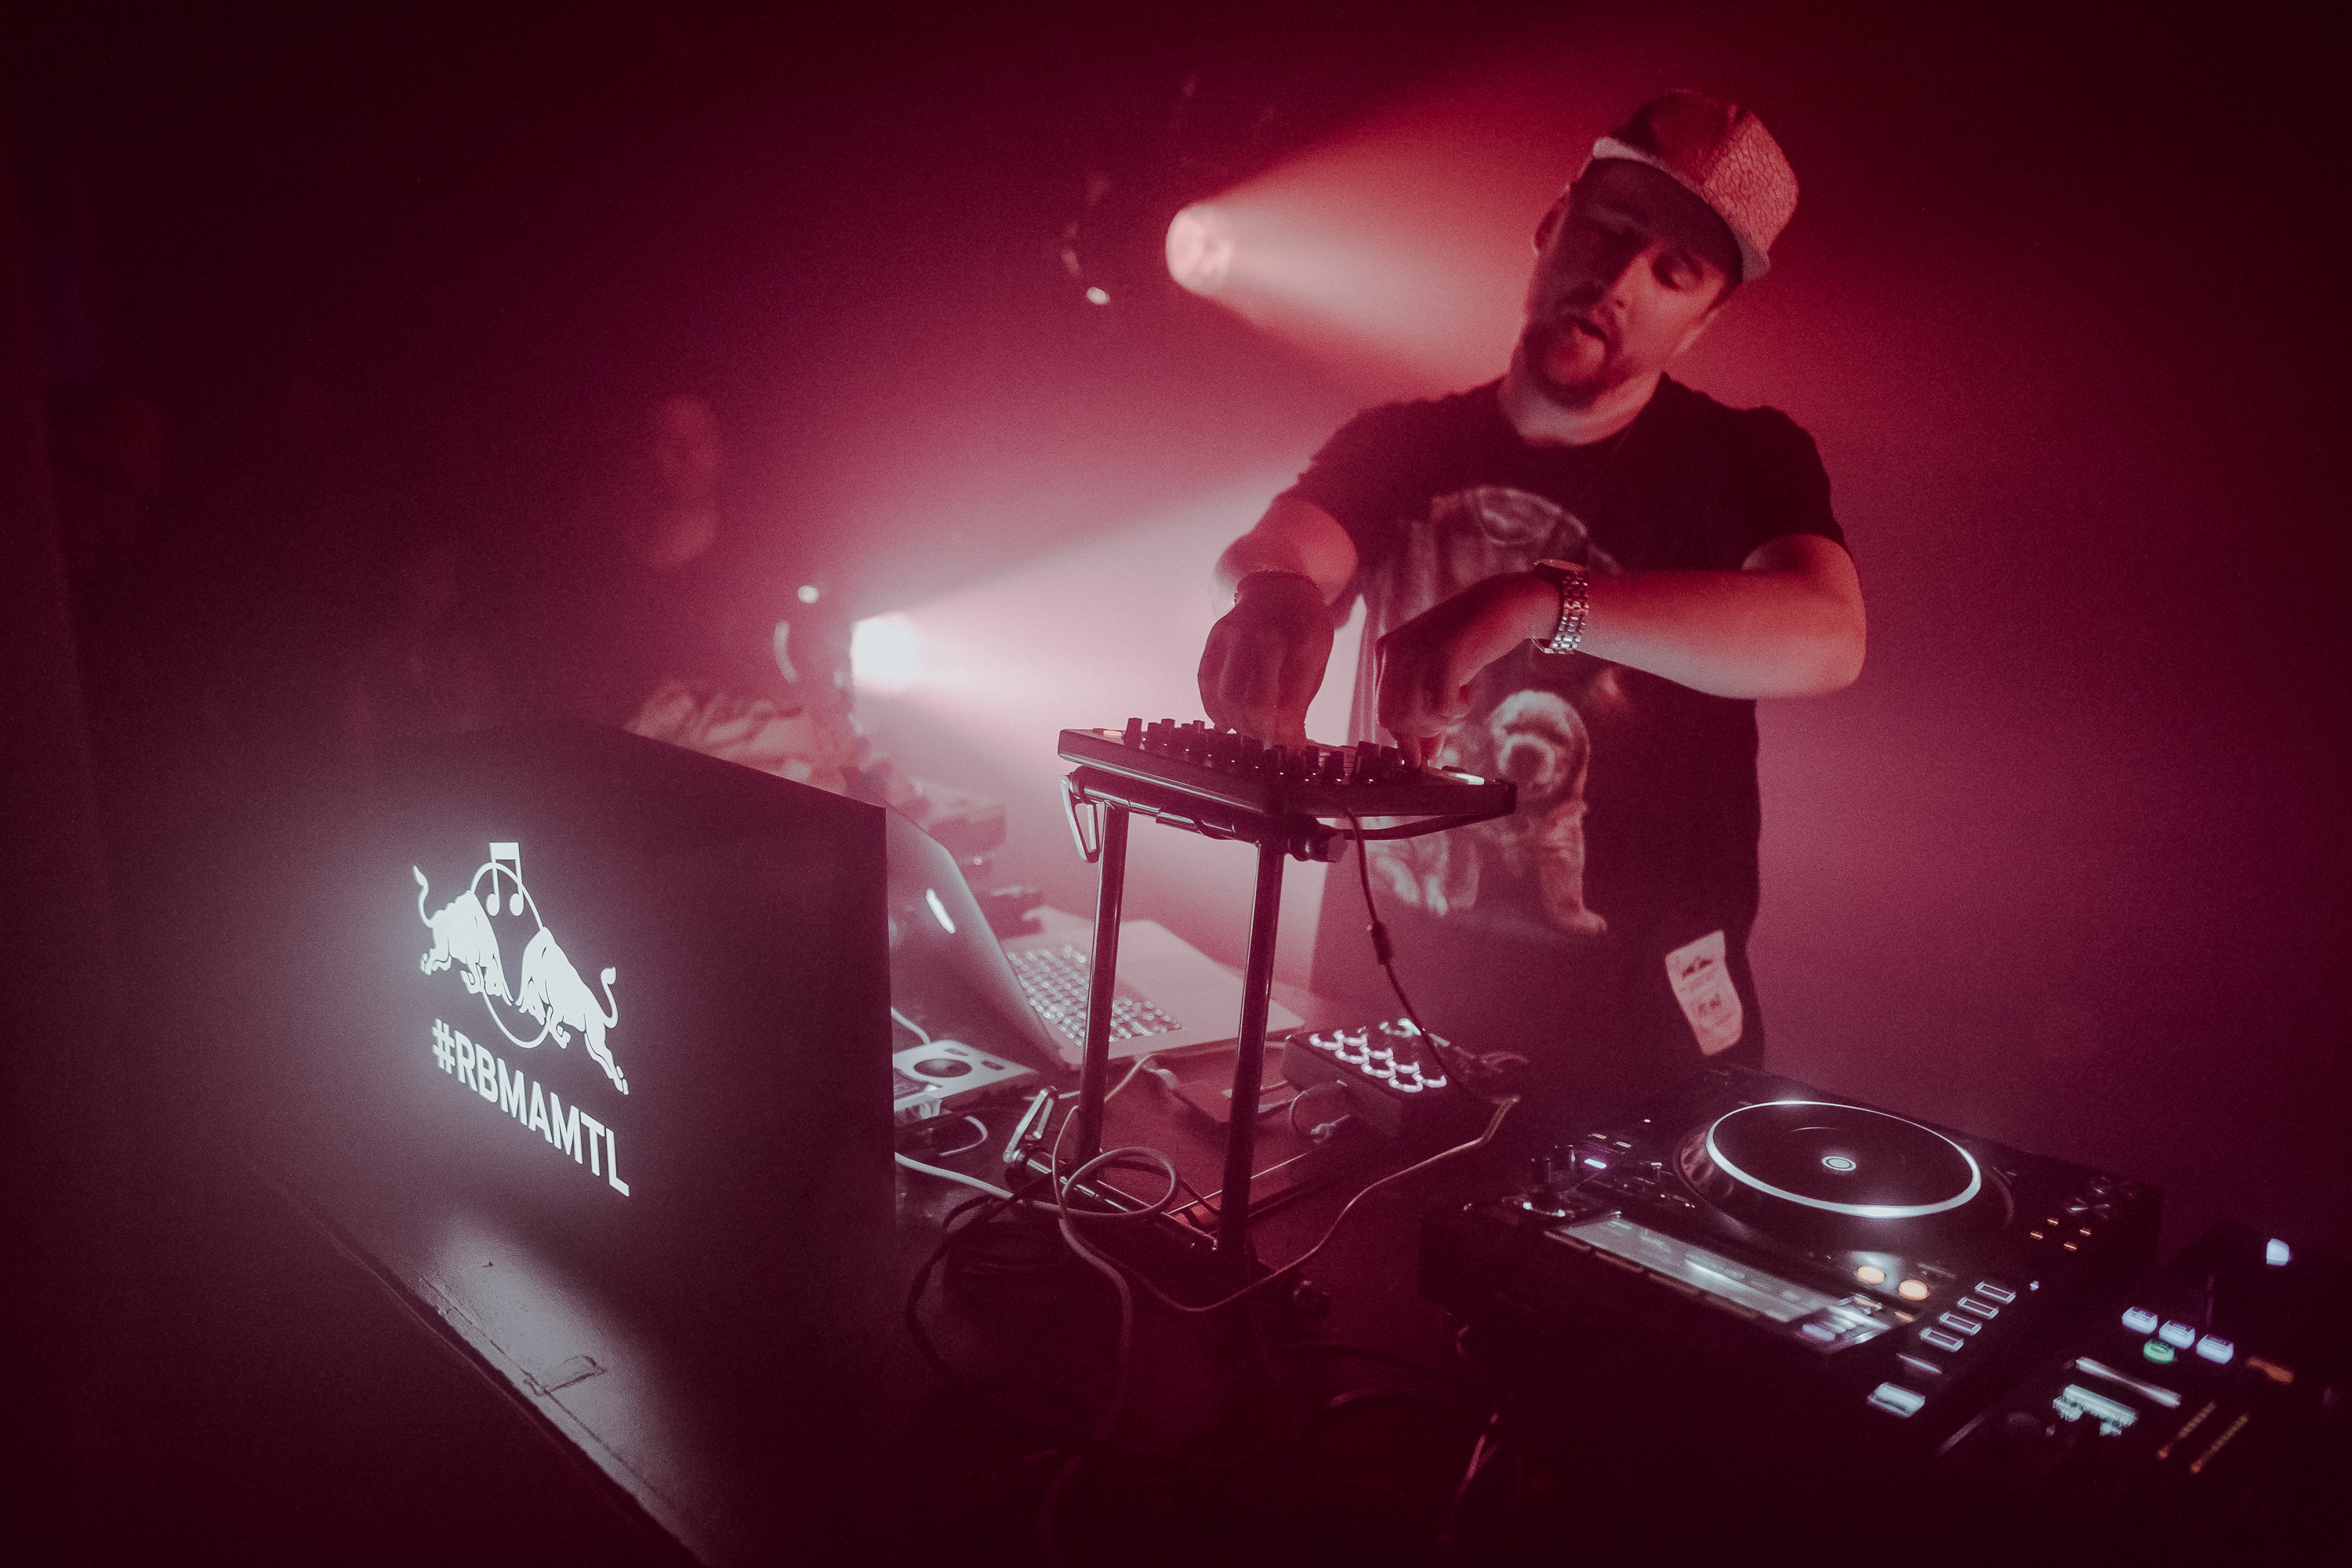 Machinedrum performs at Turbo Crunk during the Red Bull Music Academy in Montreal, September 24 to October 28, 2016